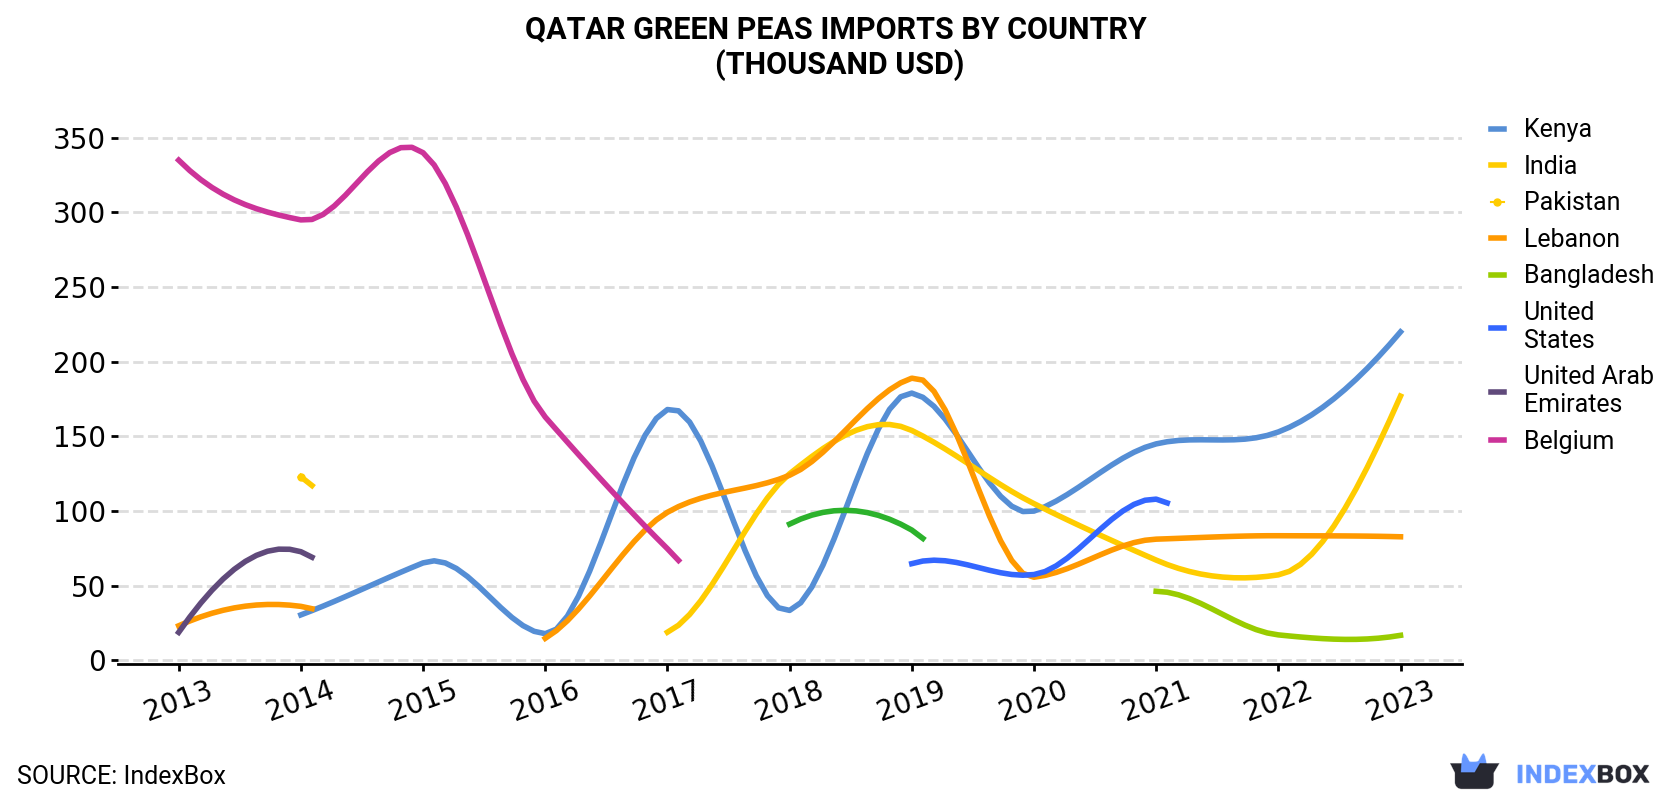 Qatar Green Peas Imports By Country (Thousand USD)